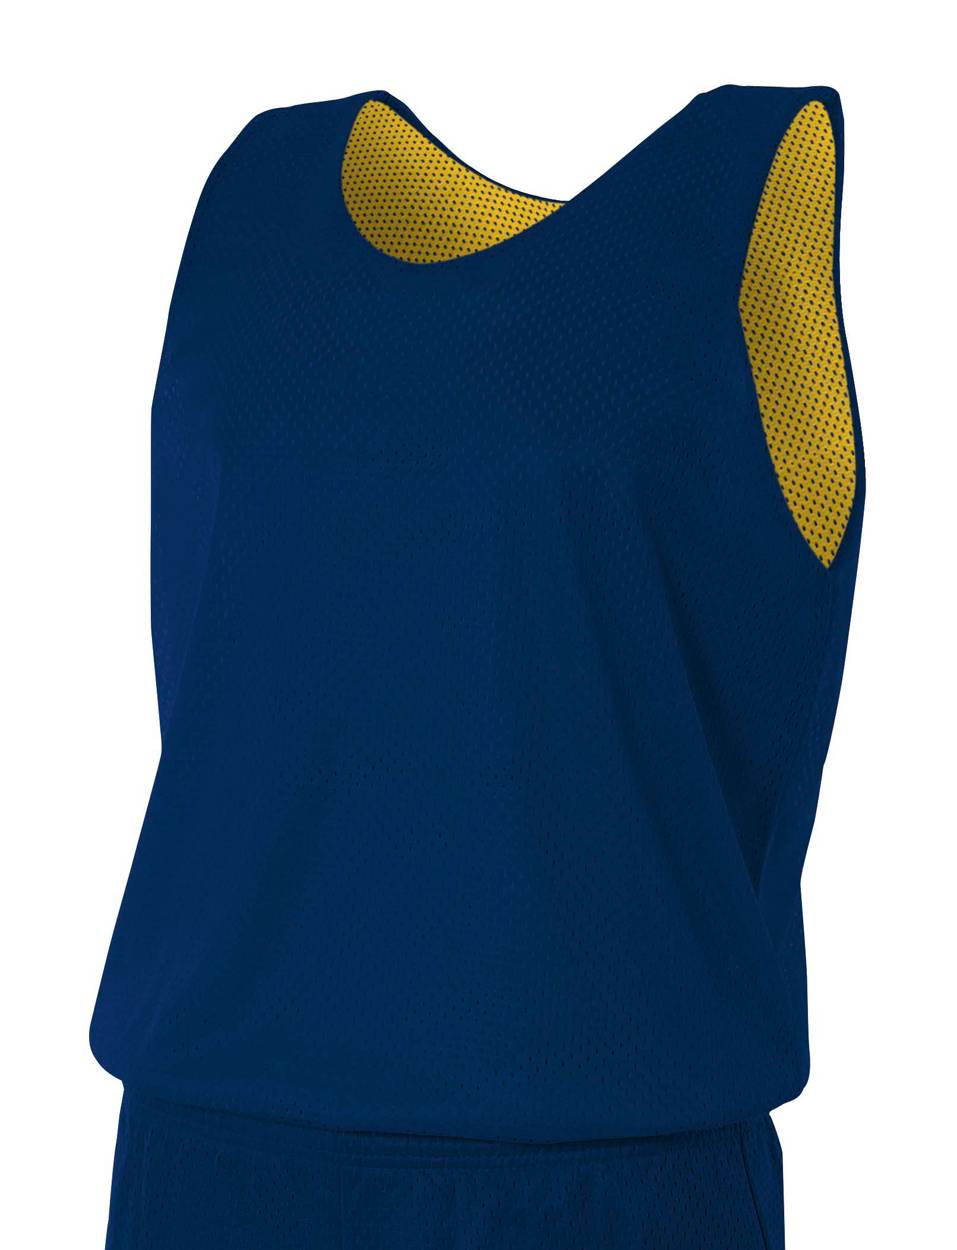 Selected Color is Navy/Gold